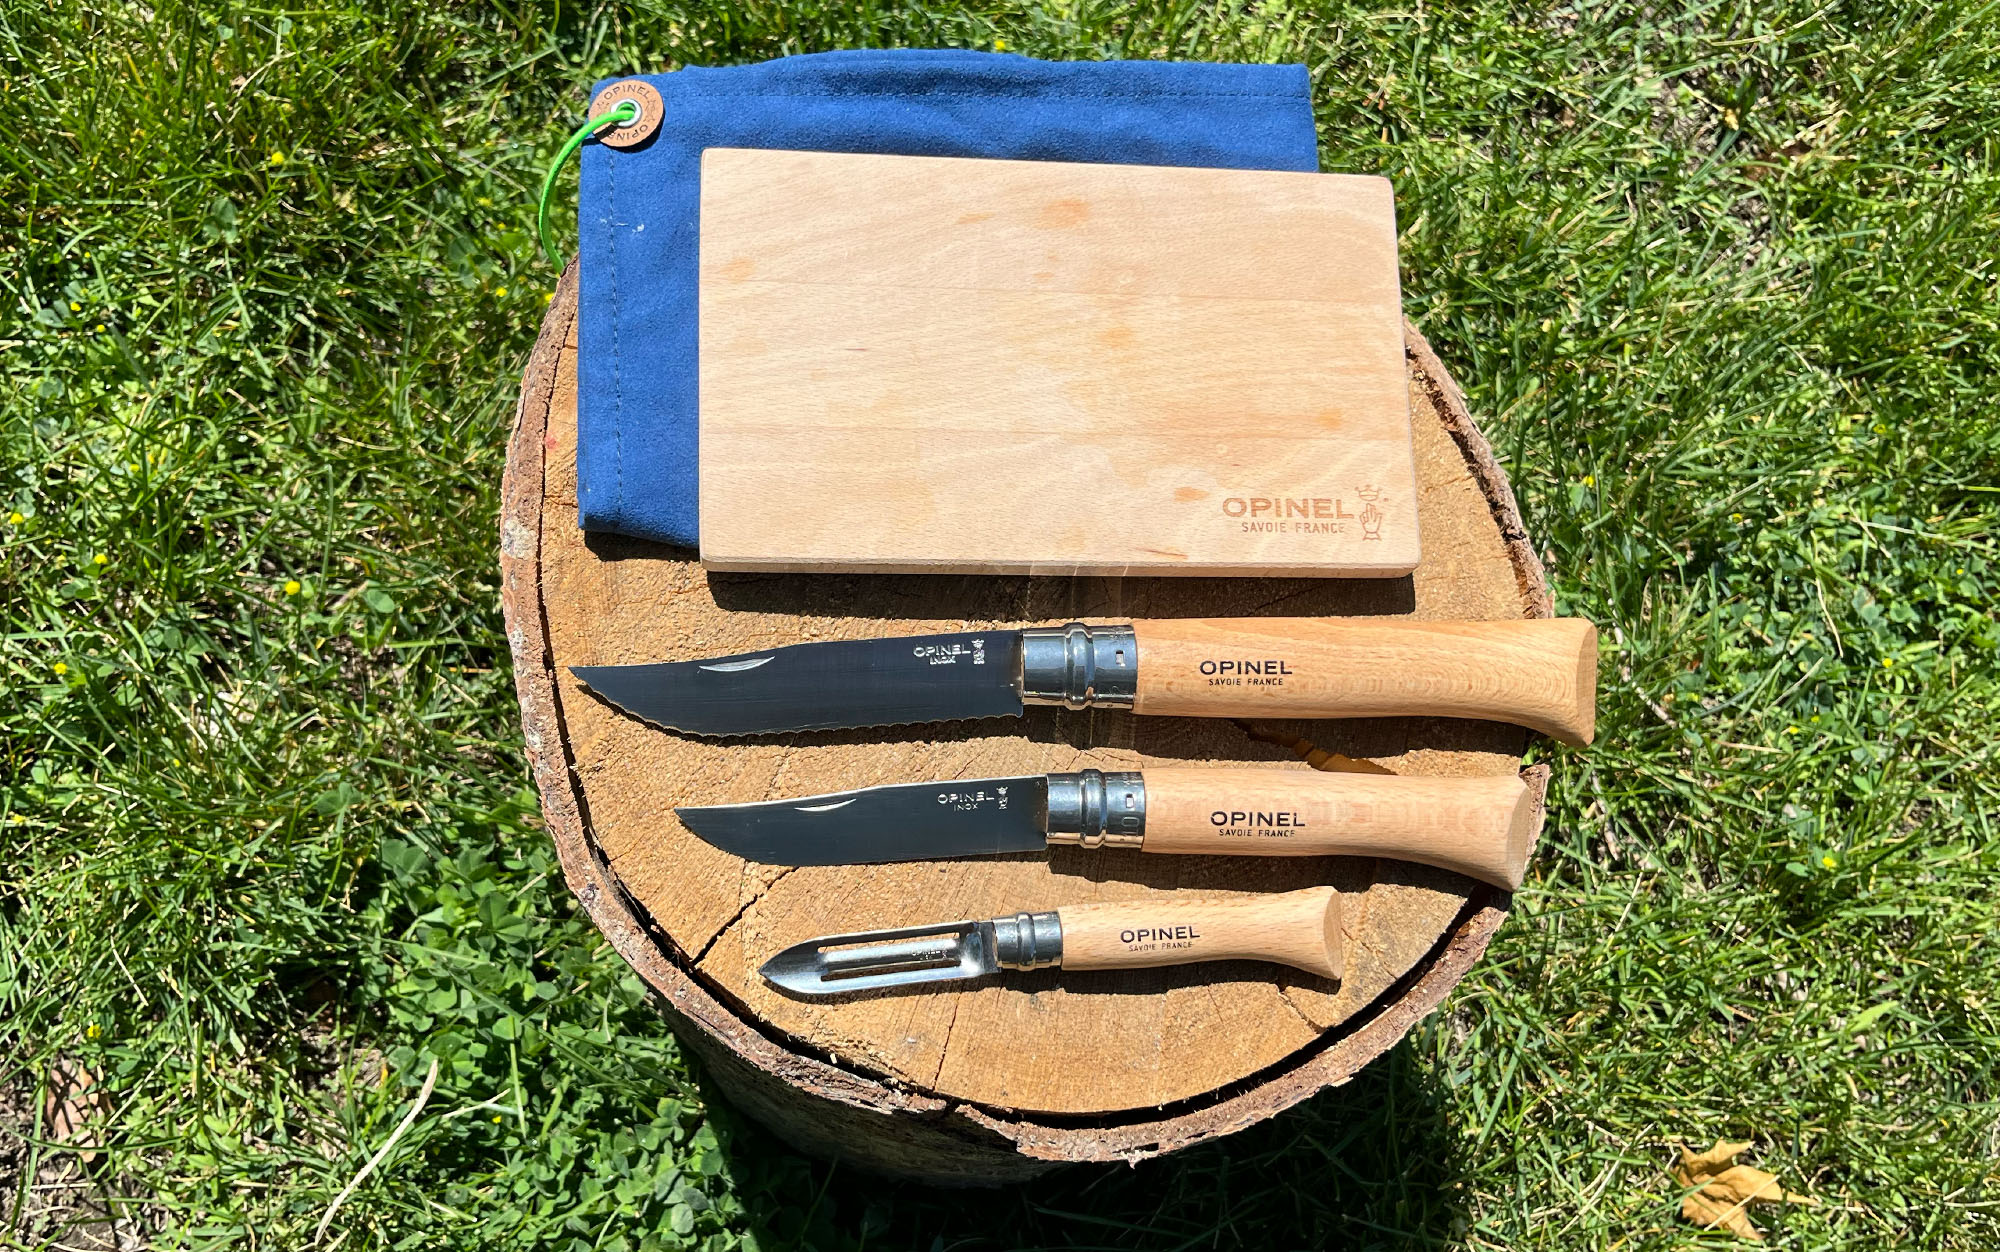 https://www.outdoorlife.com/wp-content/uploads/2023/06/30/Opinel-Cooking-Kit-Laid-out.jpg